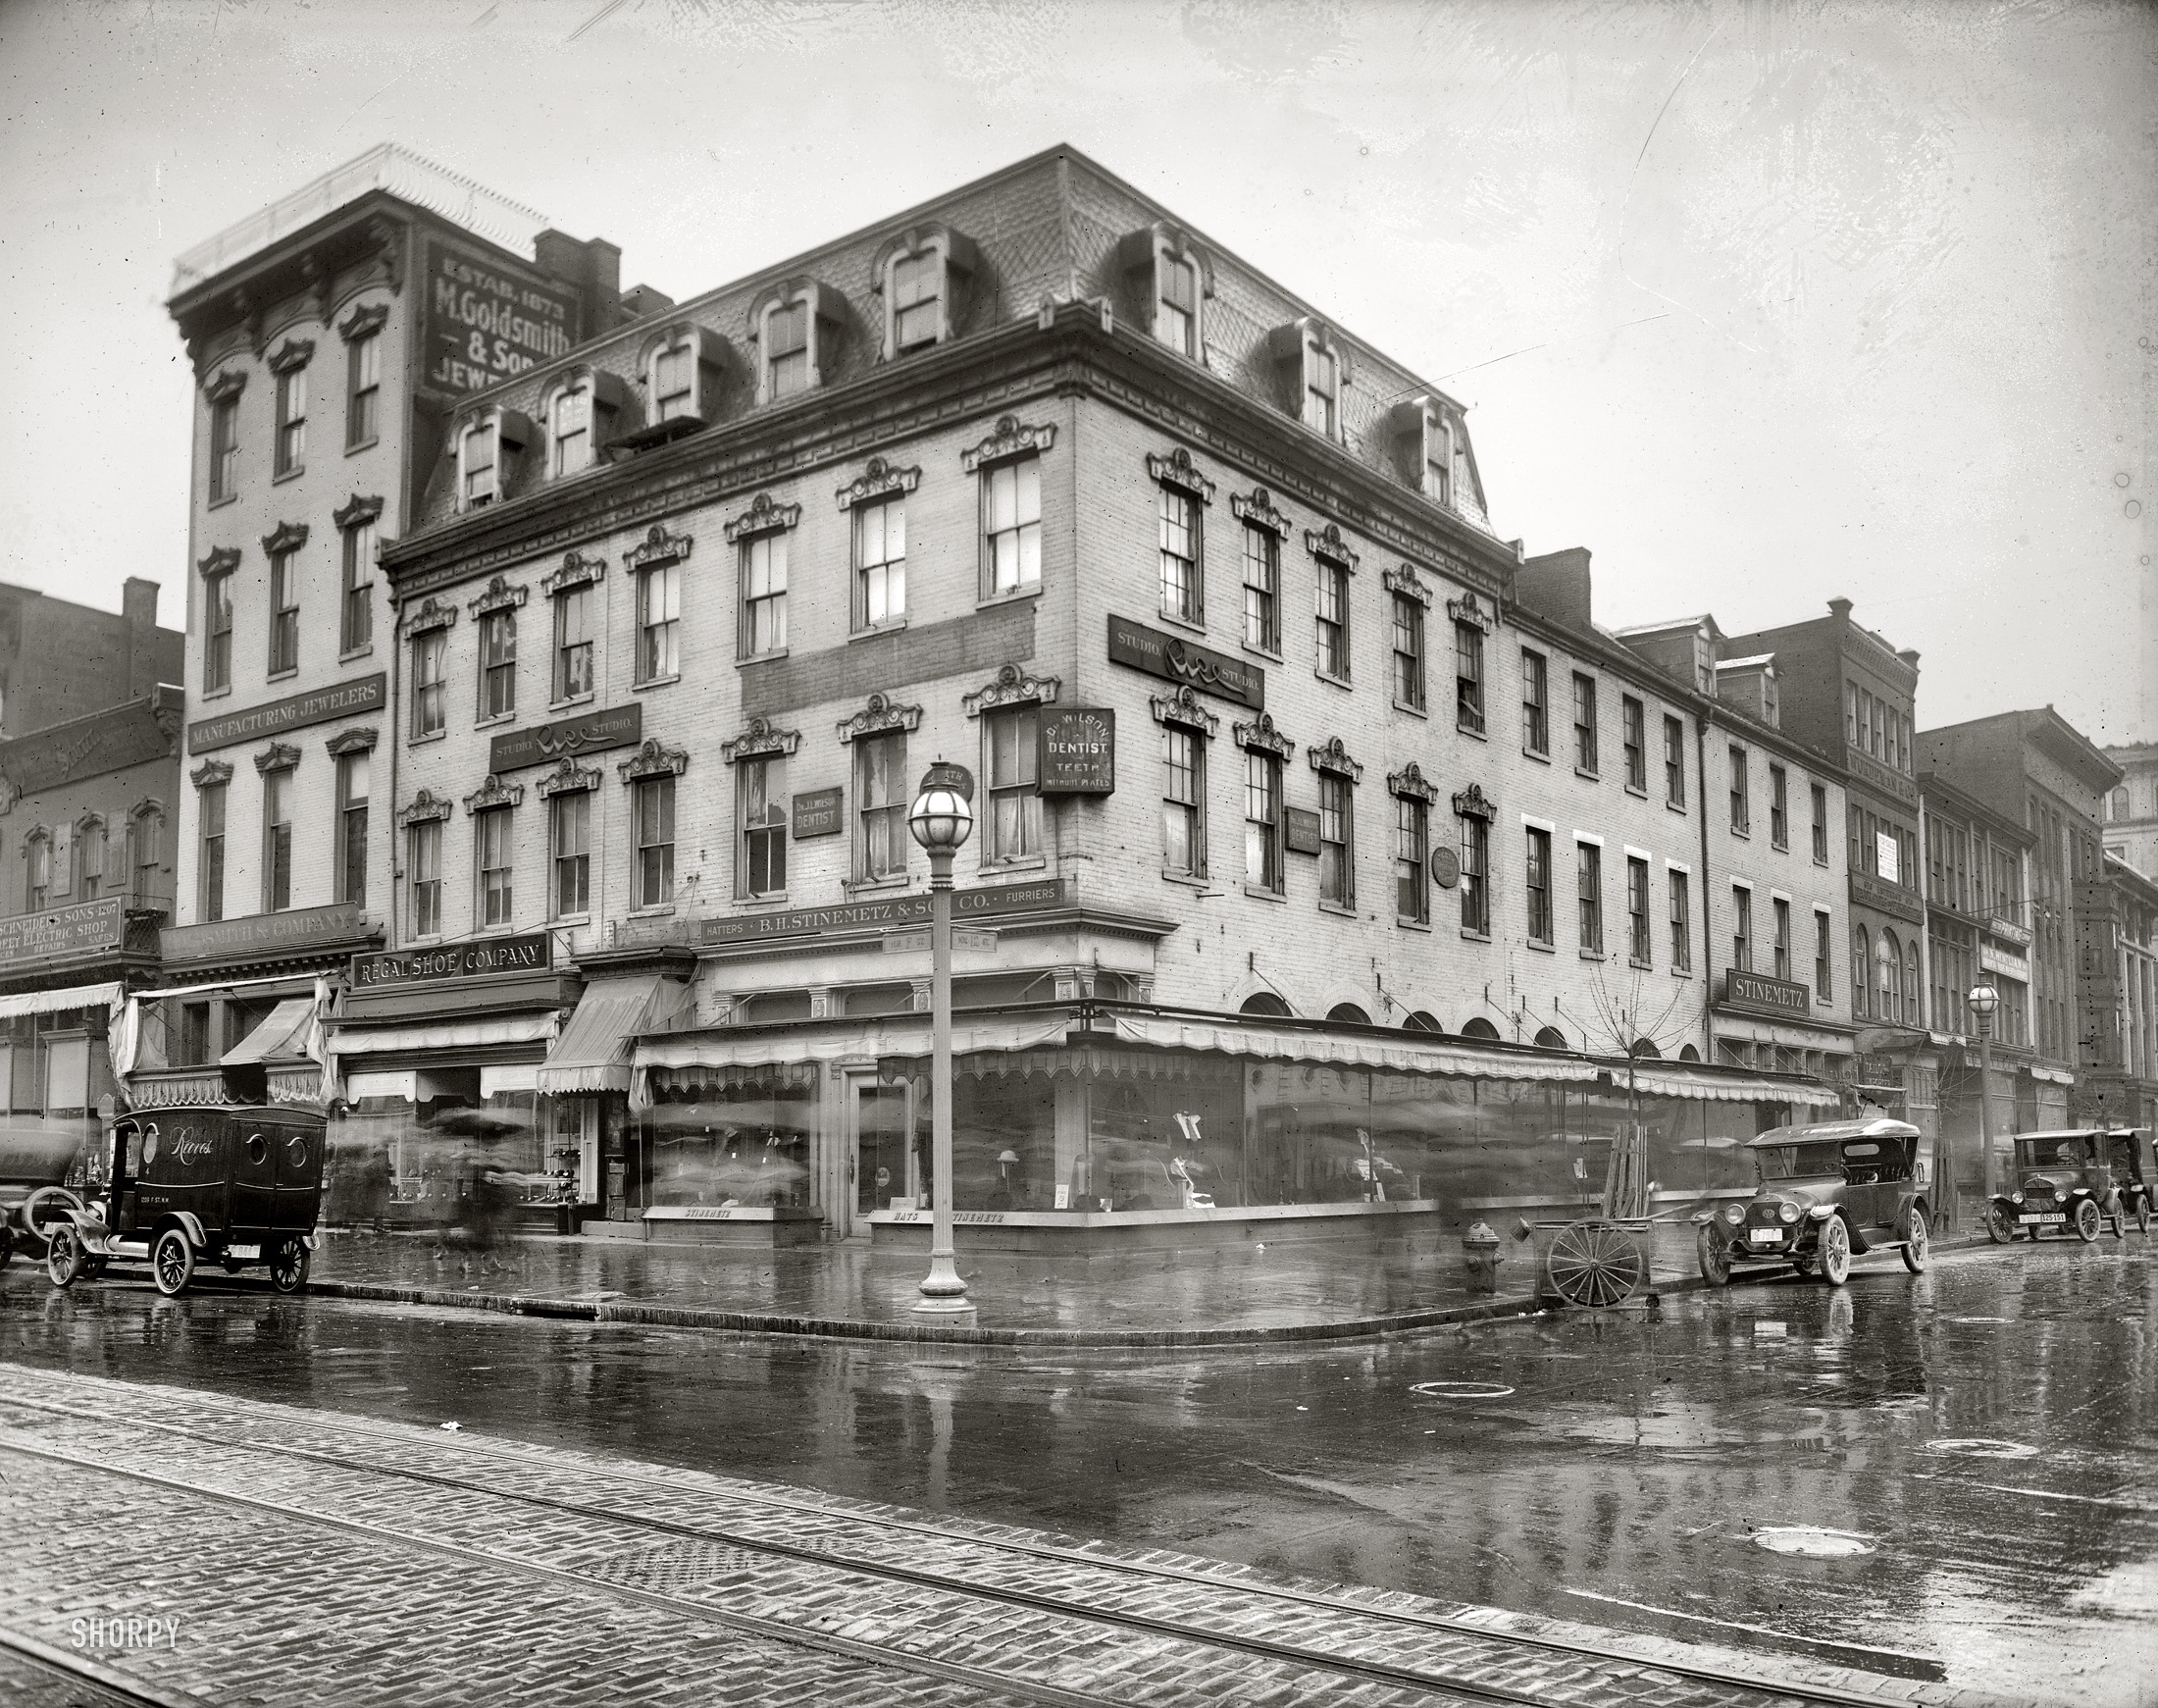 "Stinemetz Building, 12th and F streets N.W." A rainy day in Washington, D.C., in 1921. National Photo Company Collection glass negative. View full size.